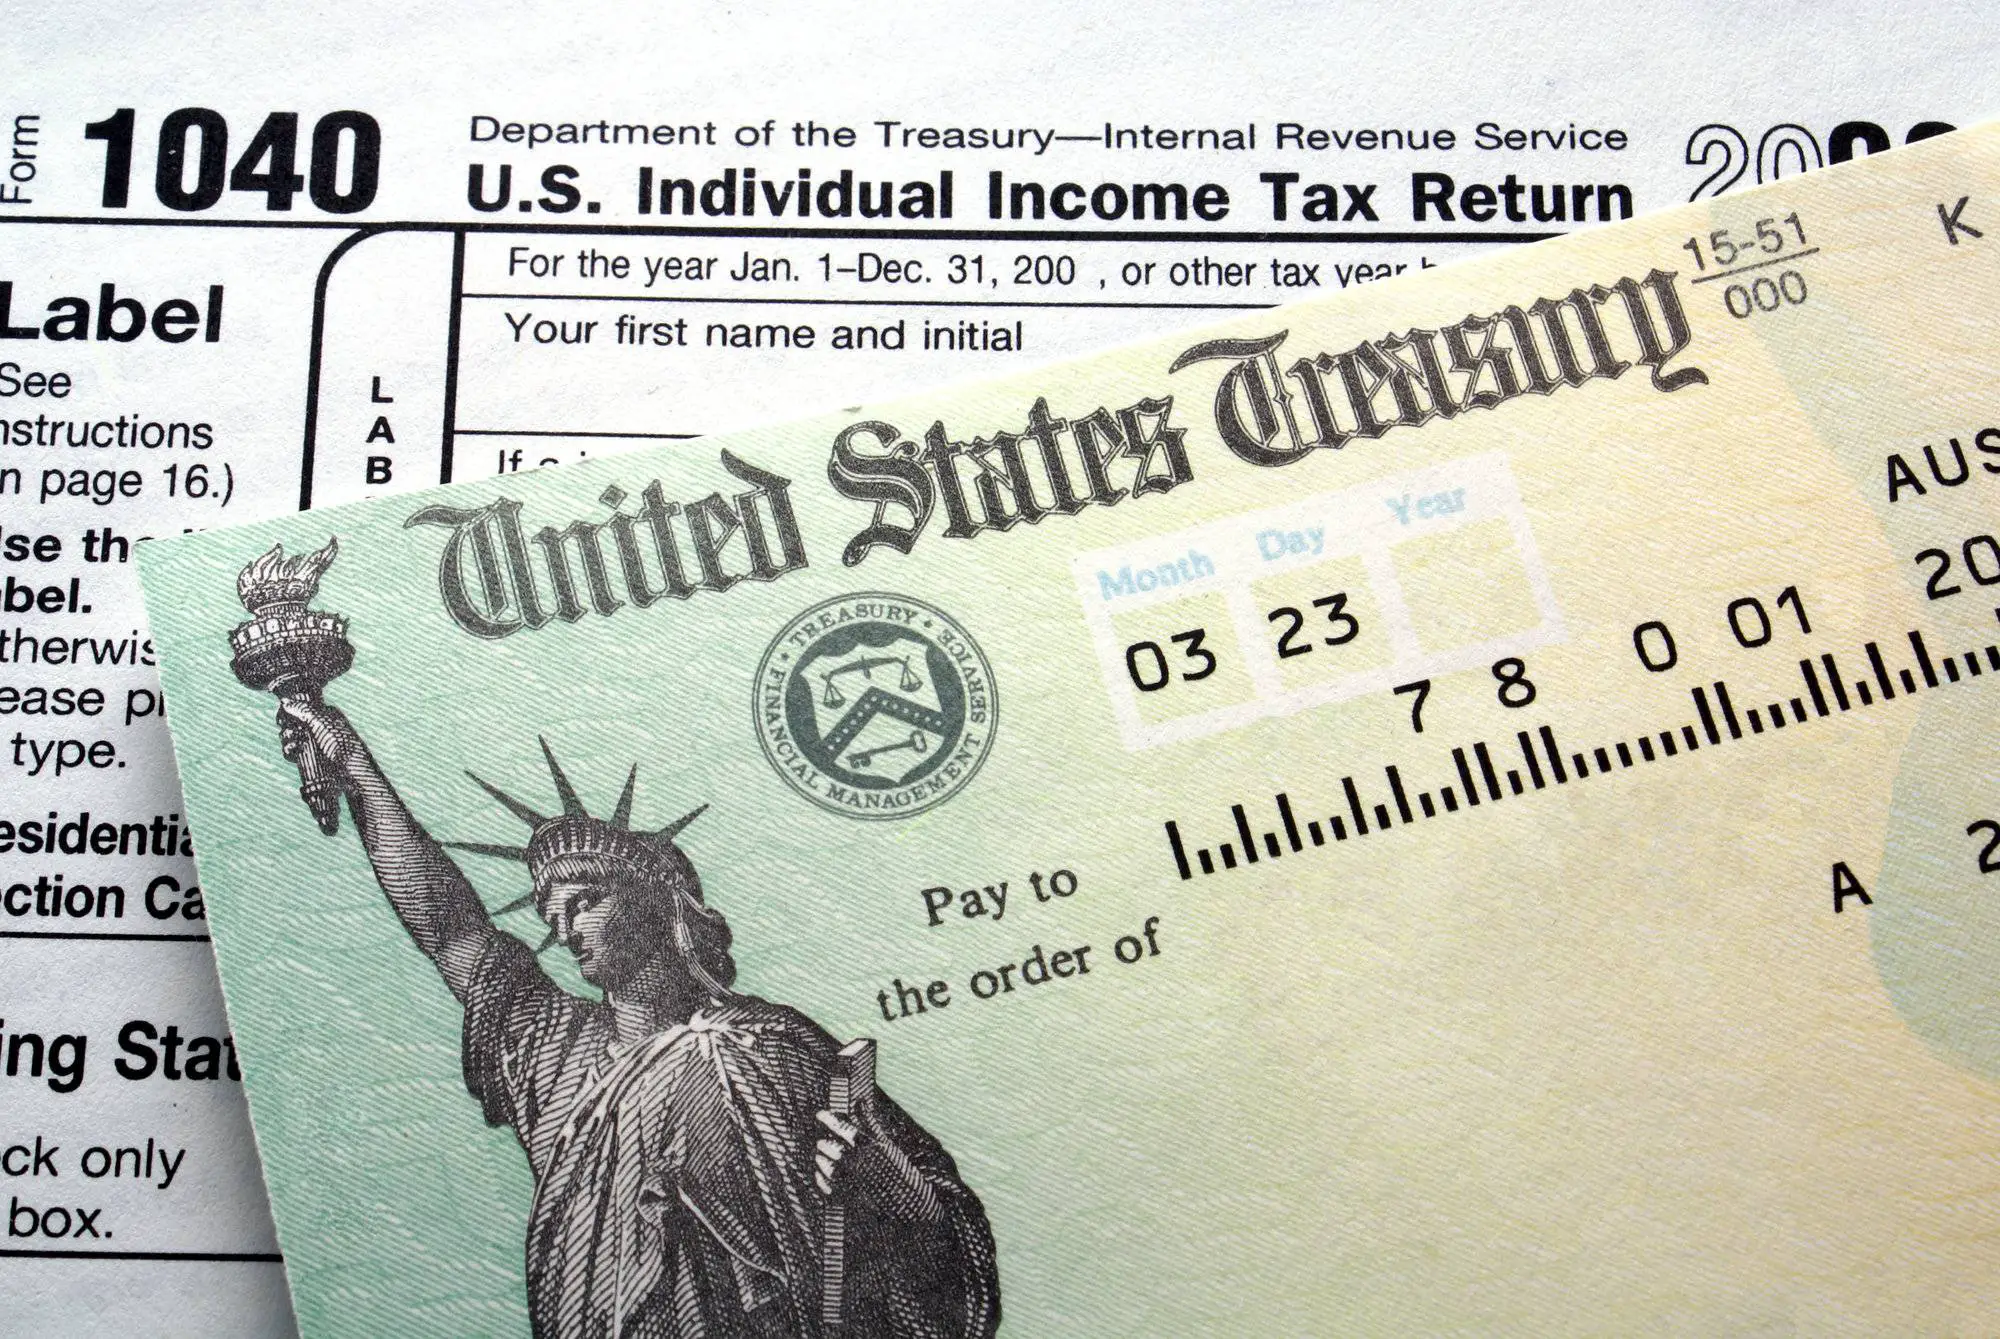 stimulus-check-timelines-how-far-behind-schedule-is-the-irs